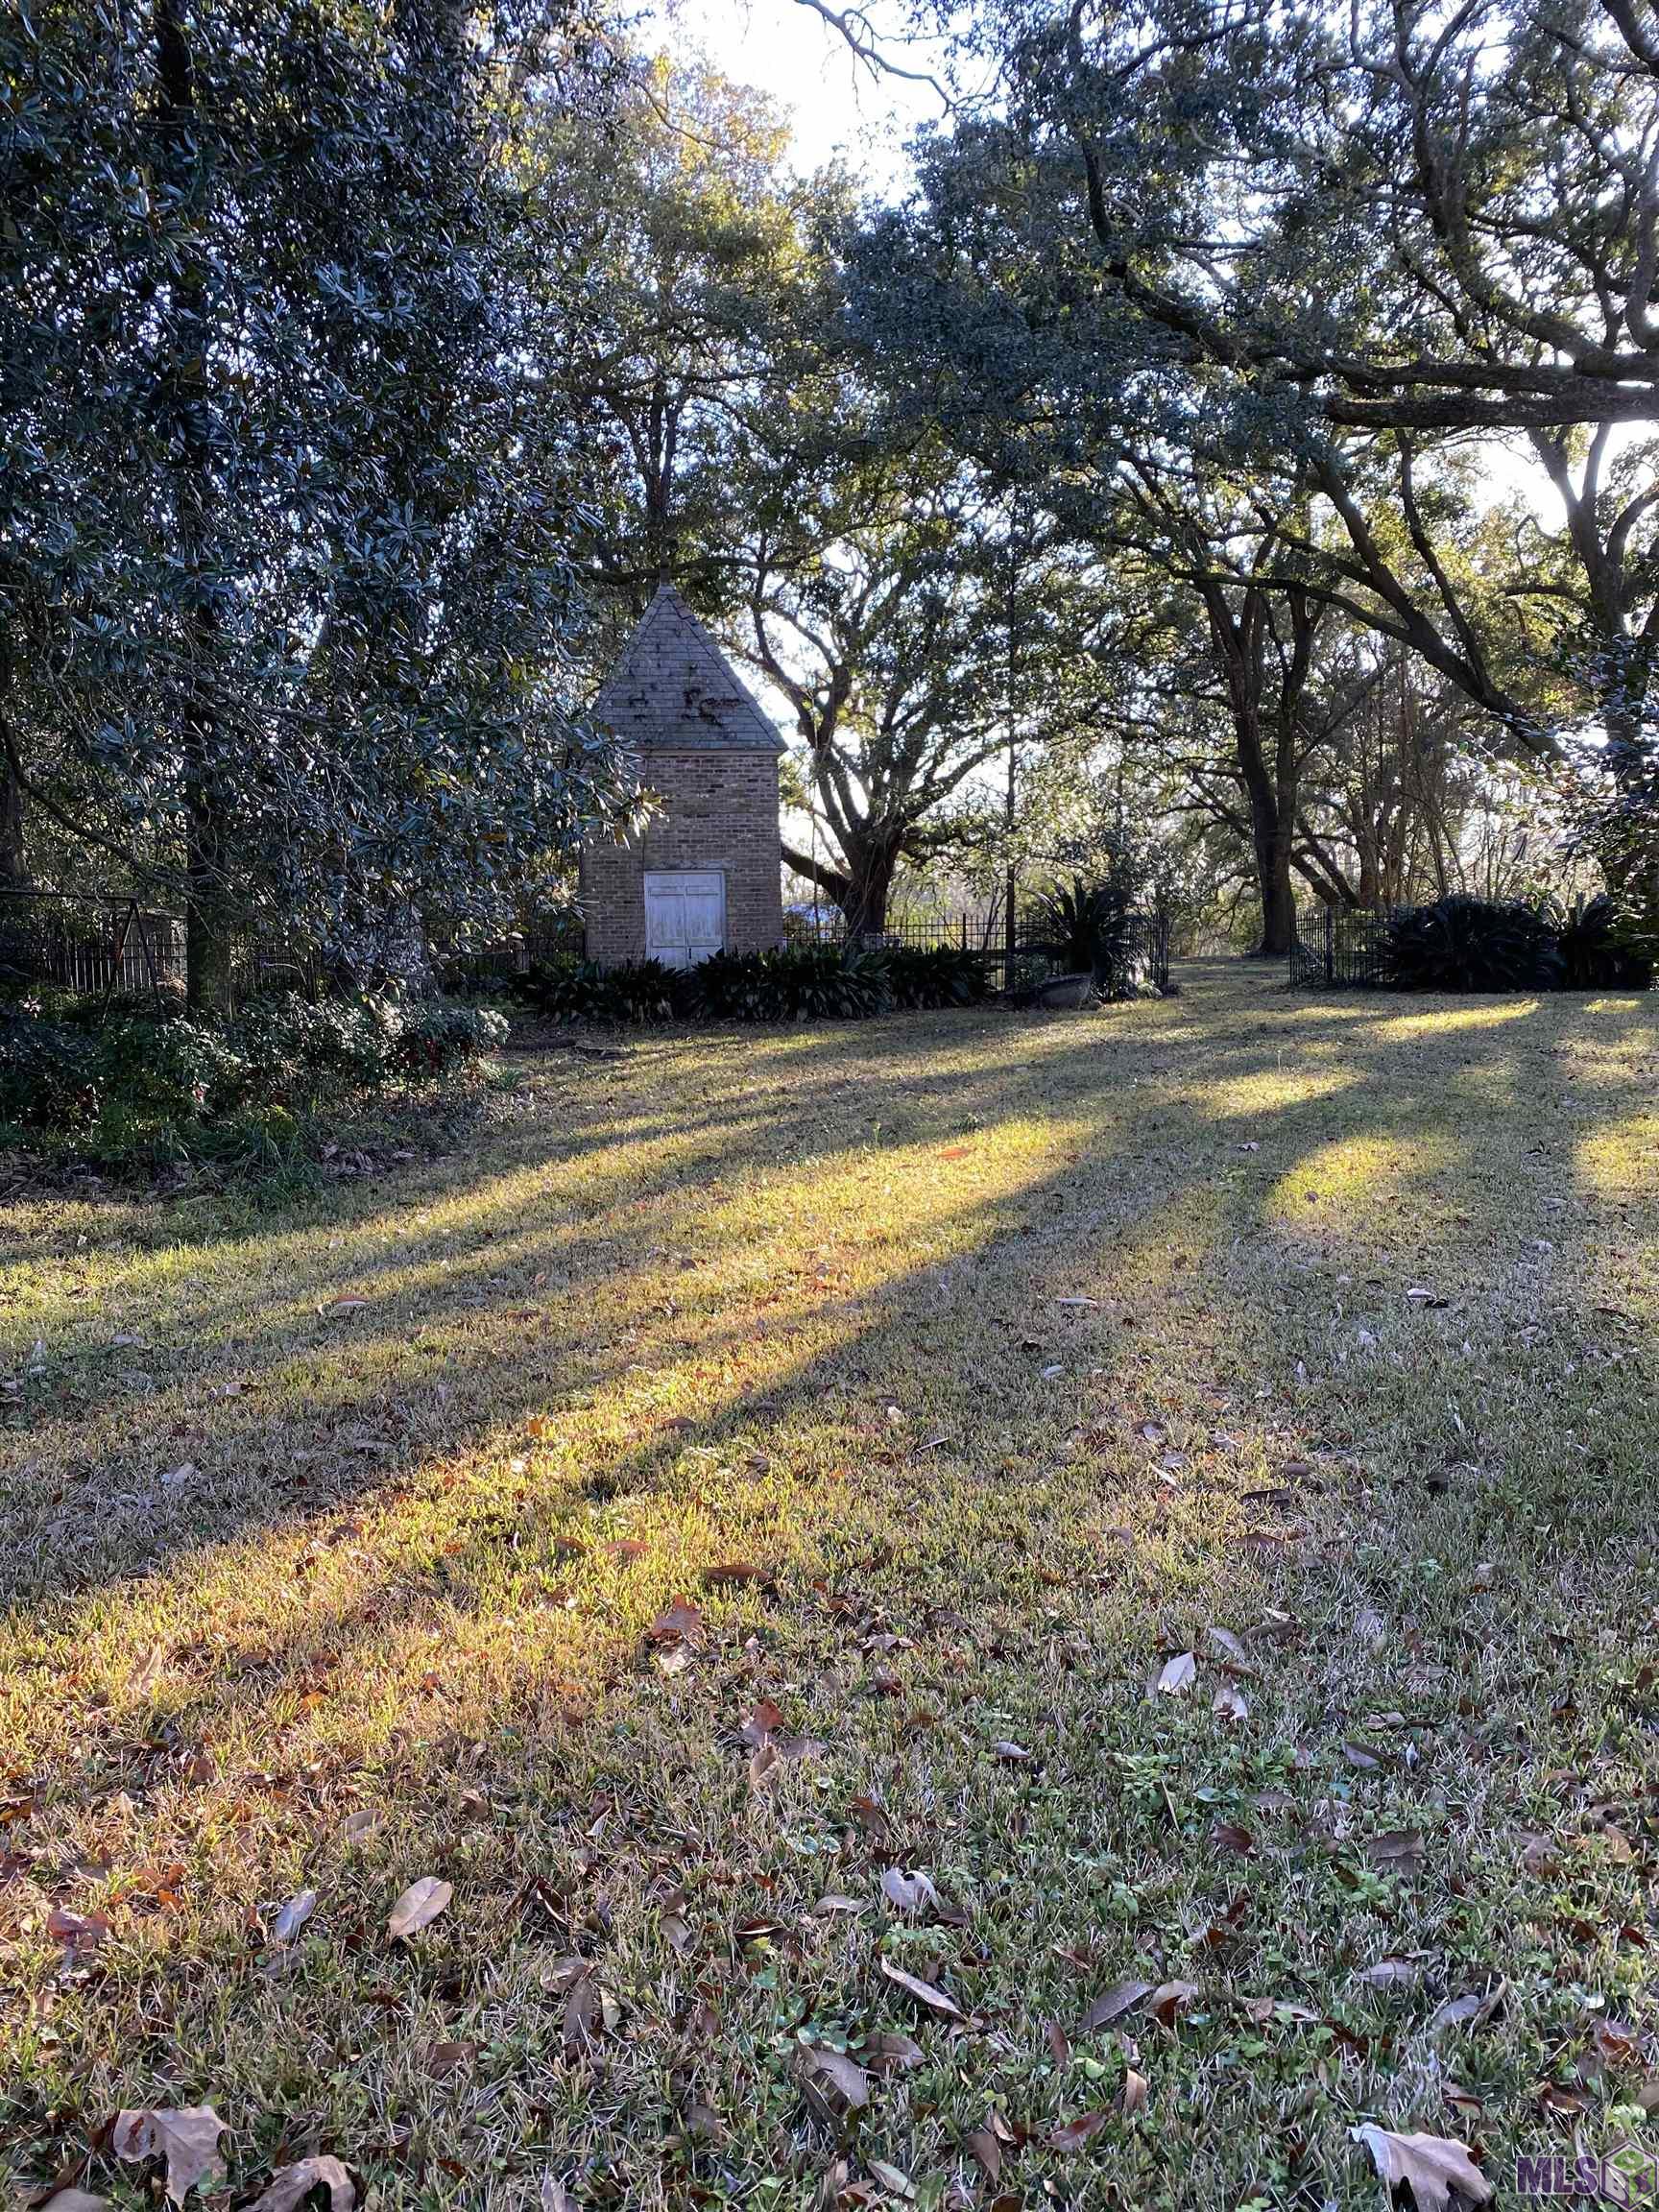 ~6.7 ACRES ON HISTORICAL HIGHLAND ROAD. PROPERTY INCLUDES 3 LEGAL DESCRIPTIONS 92 -1 ACRE LOTS AND 4.7 ACRES WHICH INCLUDES A LARGE A. HAYS TOWN HOME. THE HOME HAS SLATE ROOF, EXTRA LARGE WOOD BEAM FLOORS AND HUGE HOUSE GENERATOR. THE LAND HAS BEAUTIFUL, MATURE LIVE OAKS, CAMELLIAS, SASANQUAS, MAGNOLIAS AND MUCH MORE.